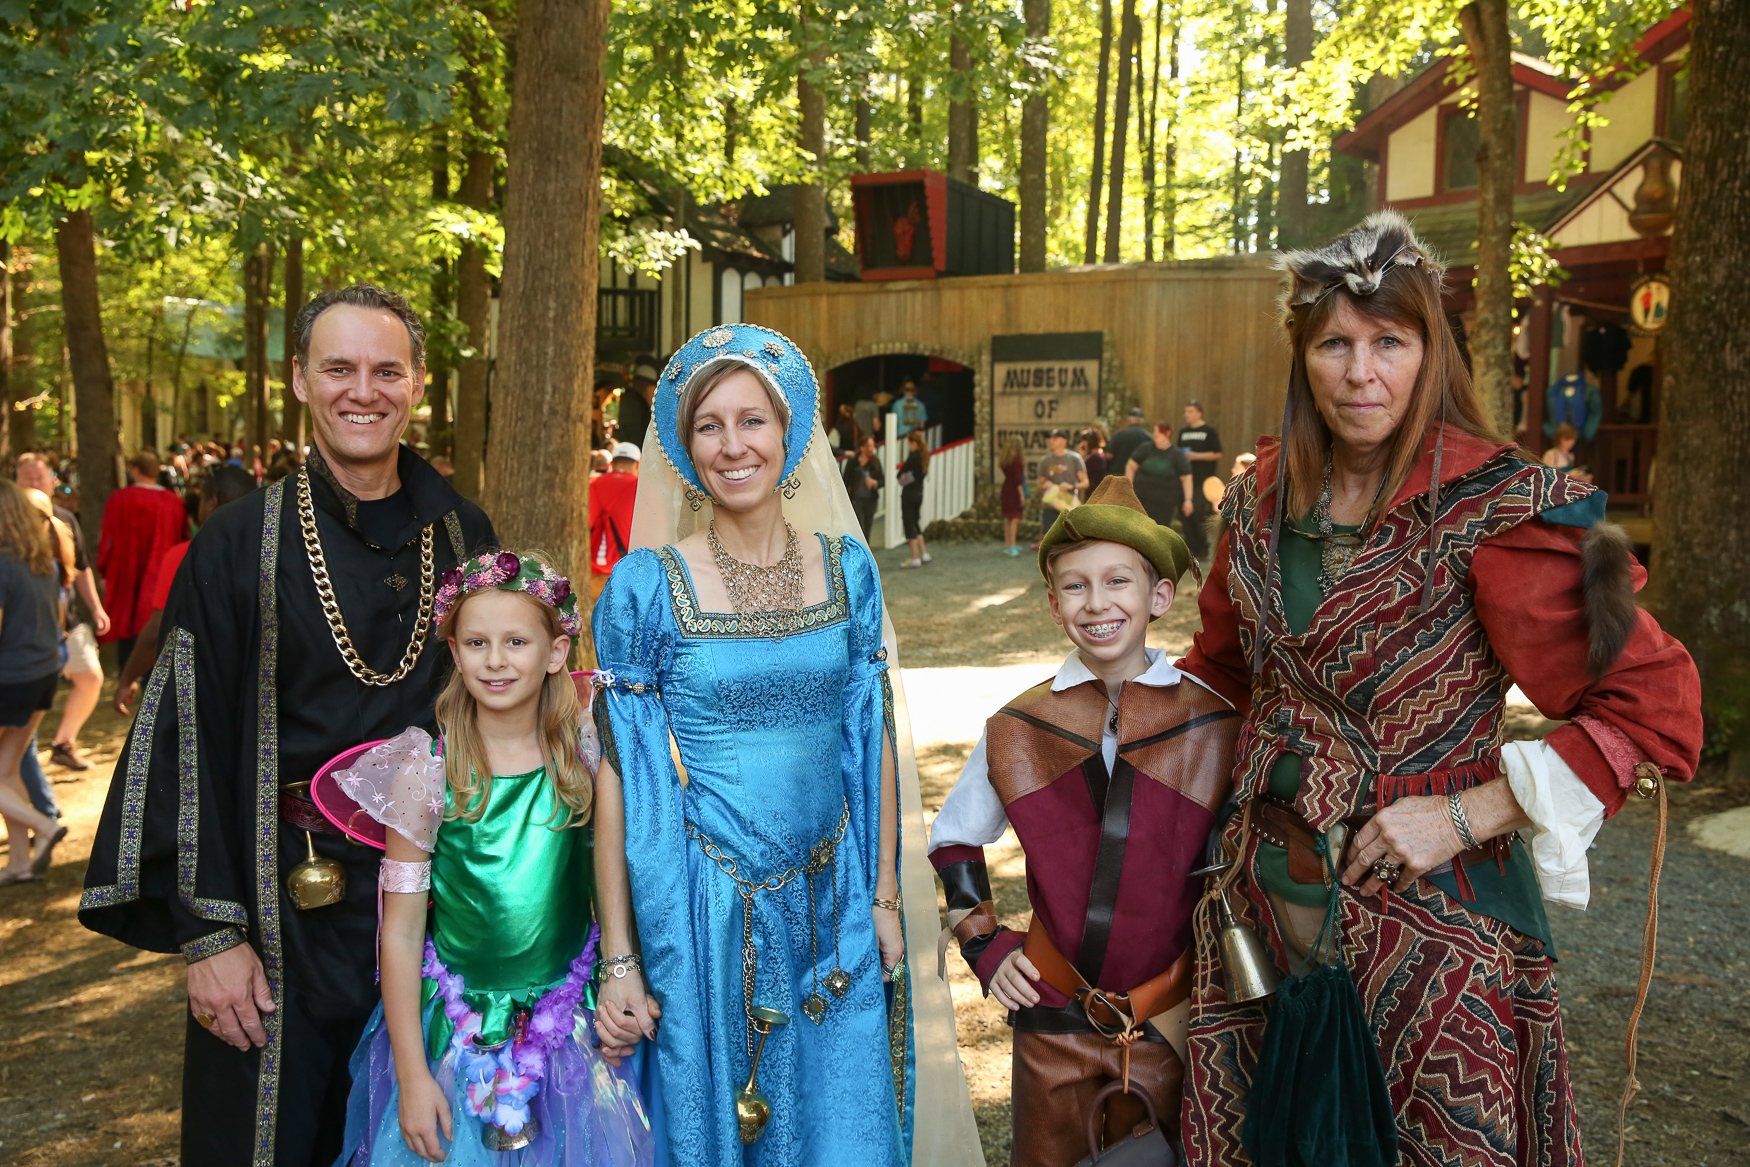 The Maryland Renaissance Fest brings the DMV back to the past DC Refined